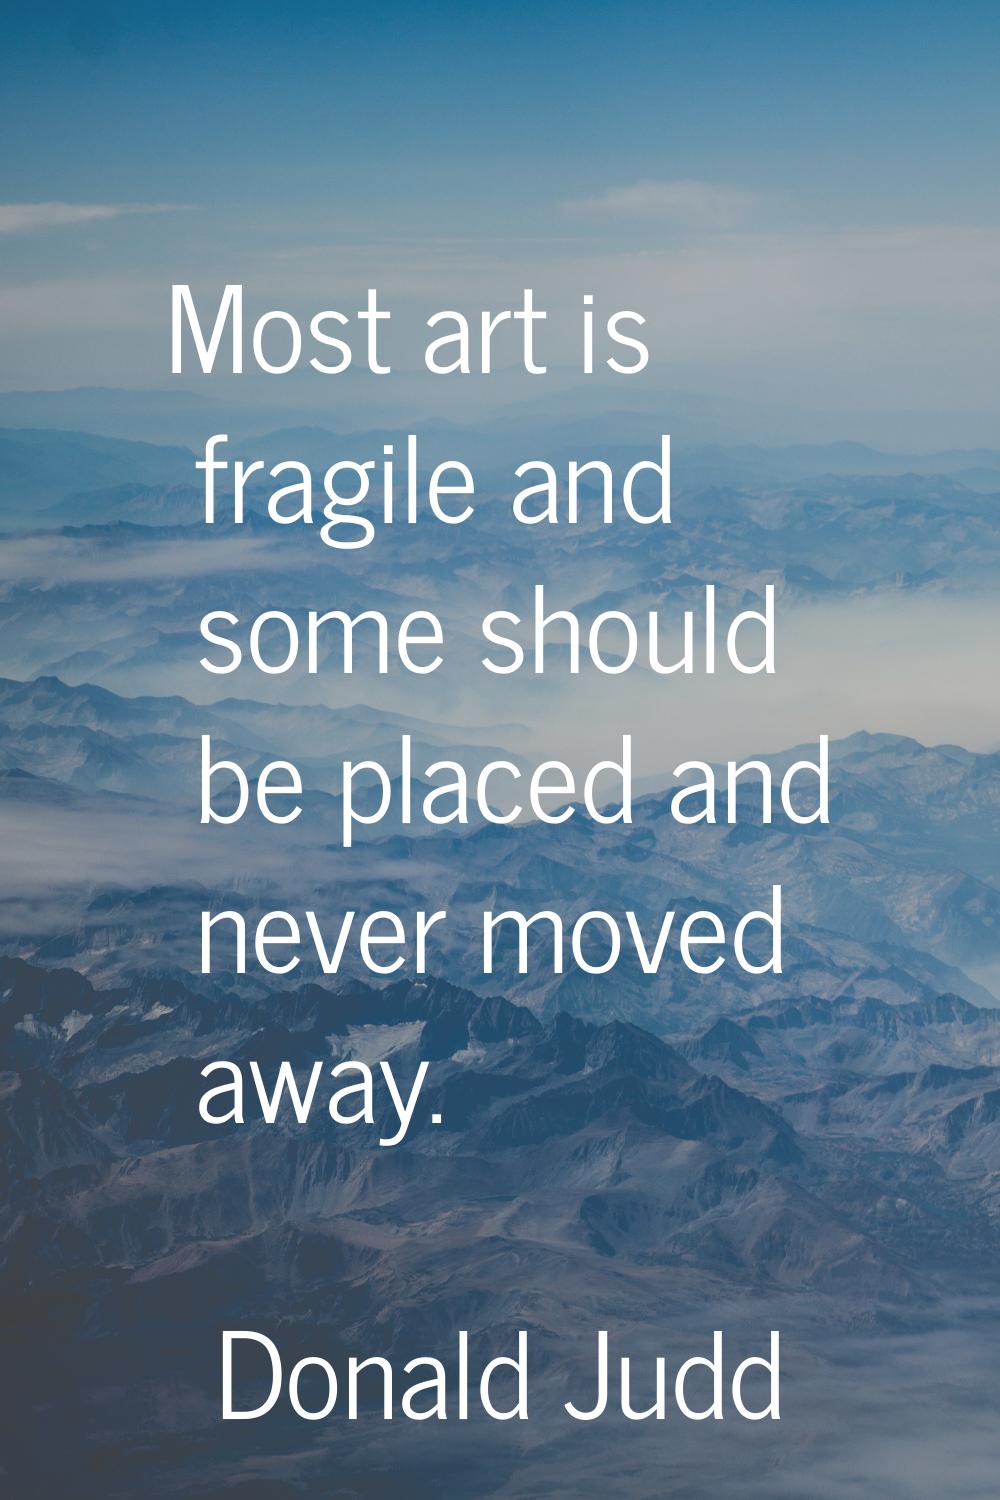 Most art is fragile and some should be placed and never moved away.